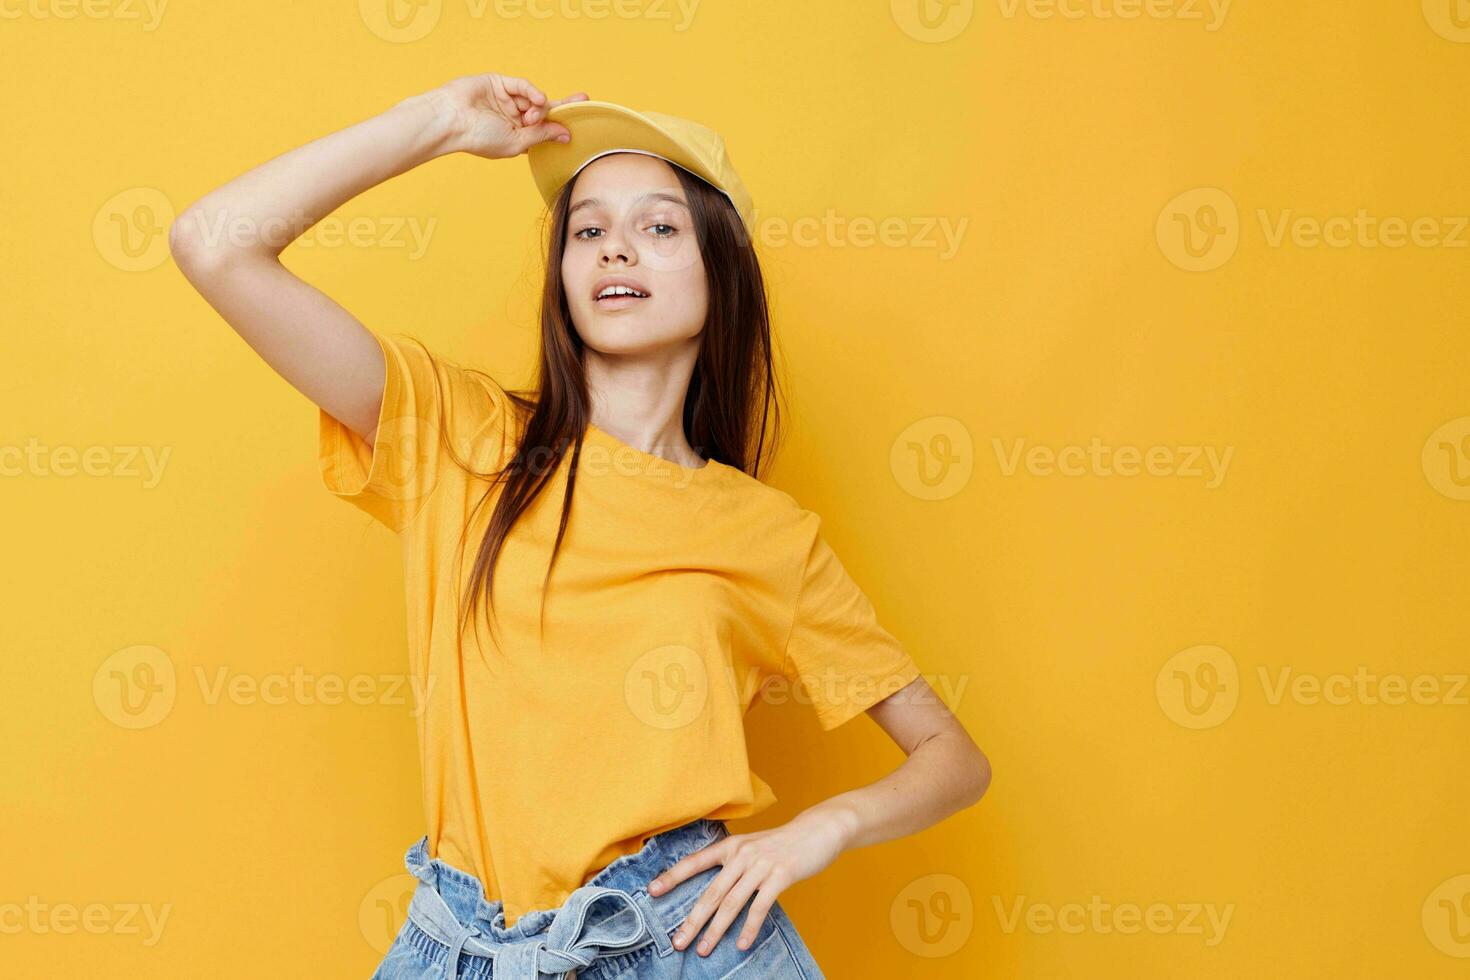 optimistic young woman posing in a yellow T-shirt and cap yellow background photo